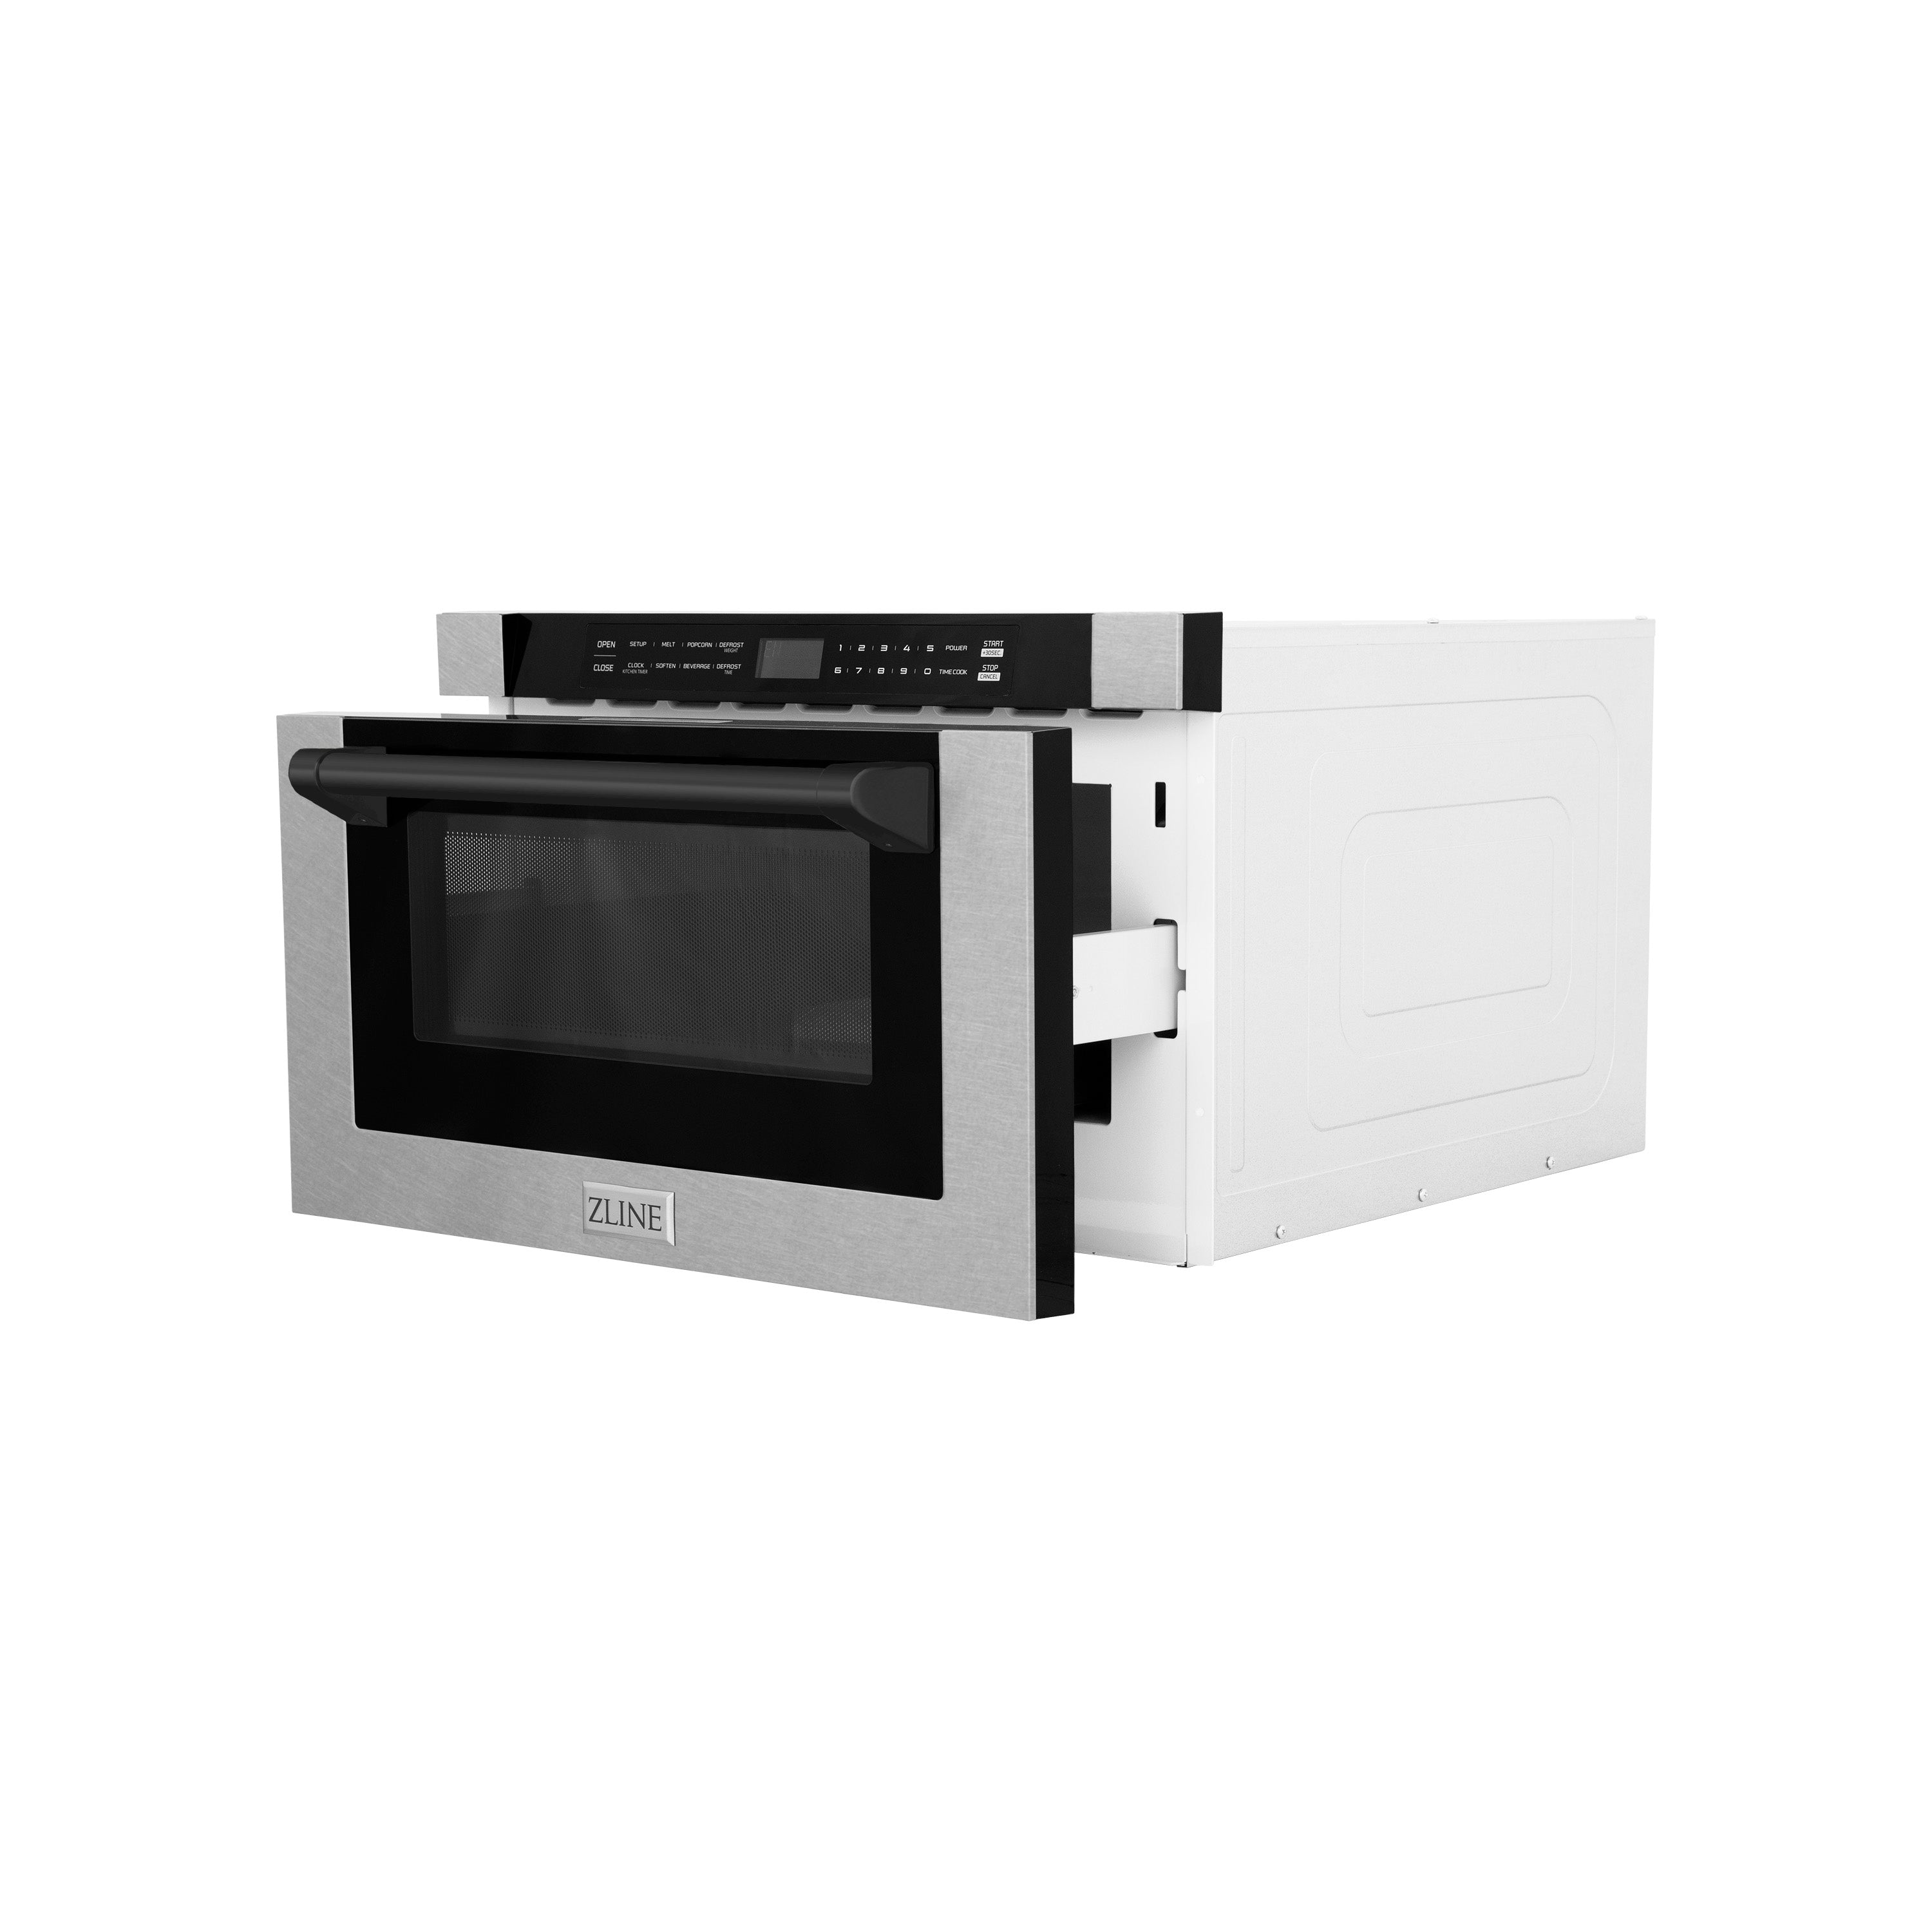 ZLINE Autograph Edition 24 in. Microwave in DuraSnow Stainless Steel with Traditional Handles and Matte Black Accents (MWDZ-1-SS-H-MB) Side View Drawer Open